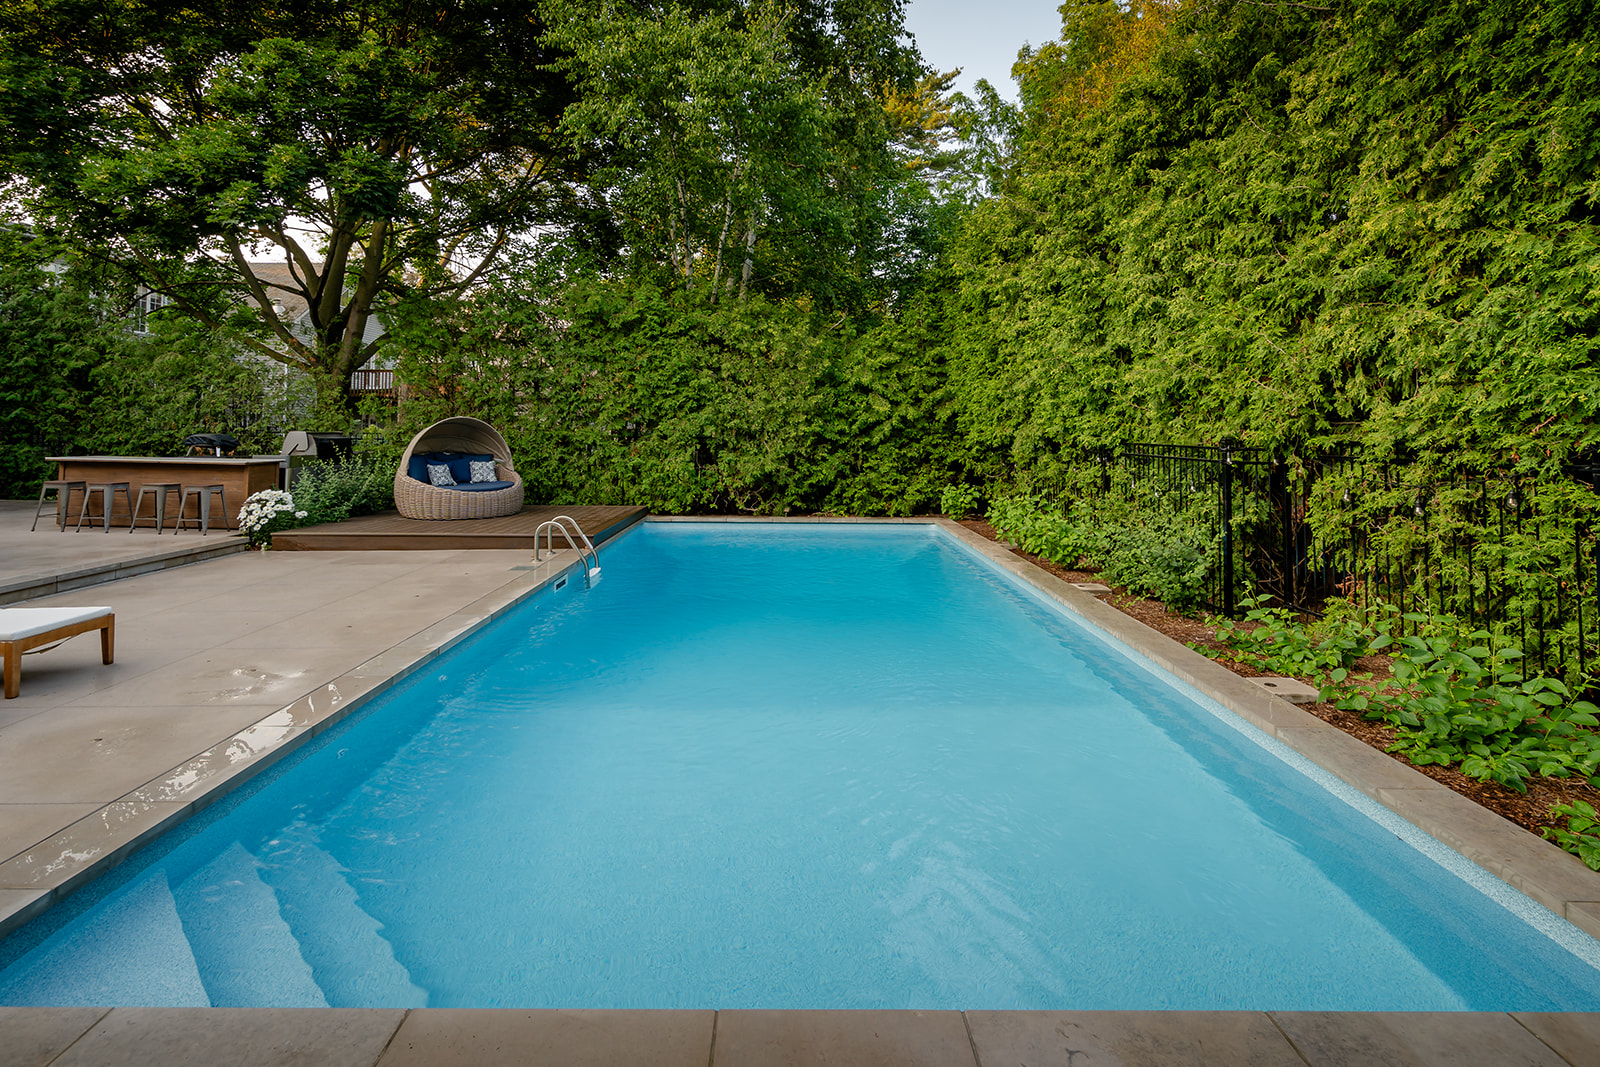 An inground pool with a seating area in the corner.